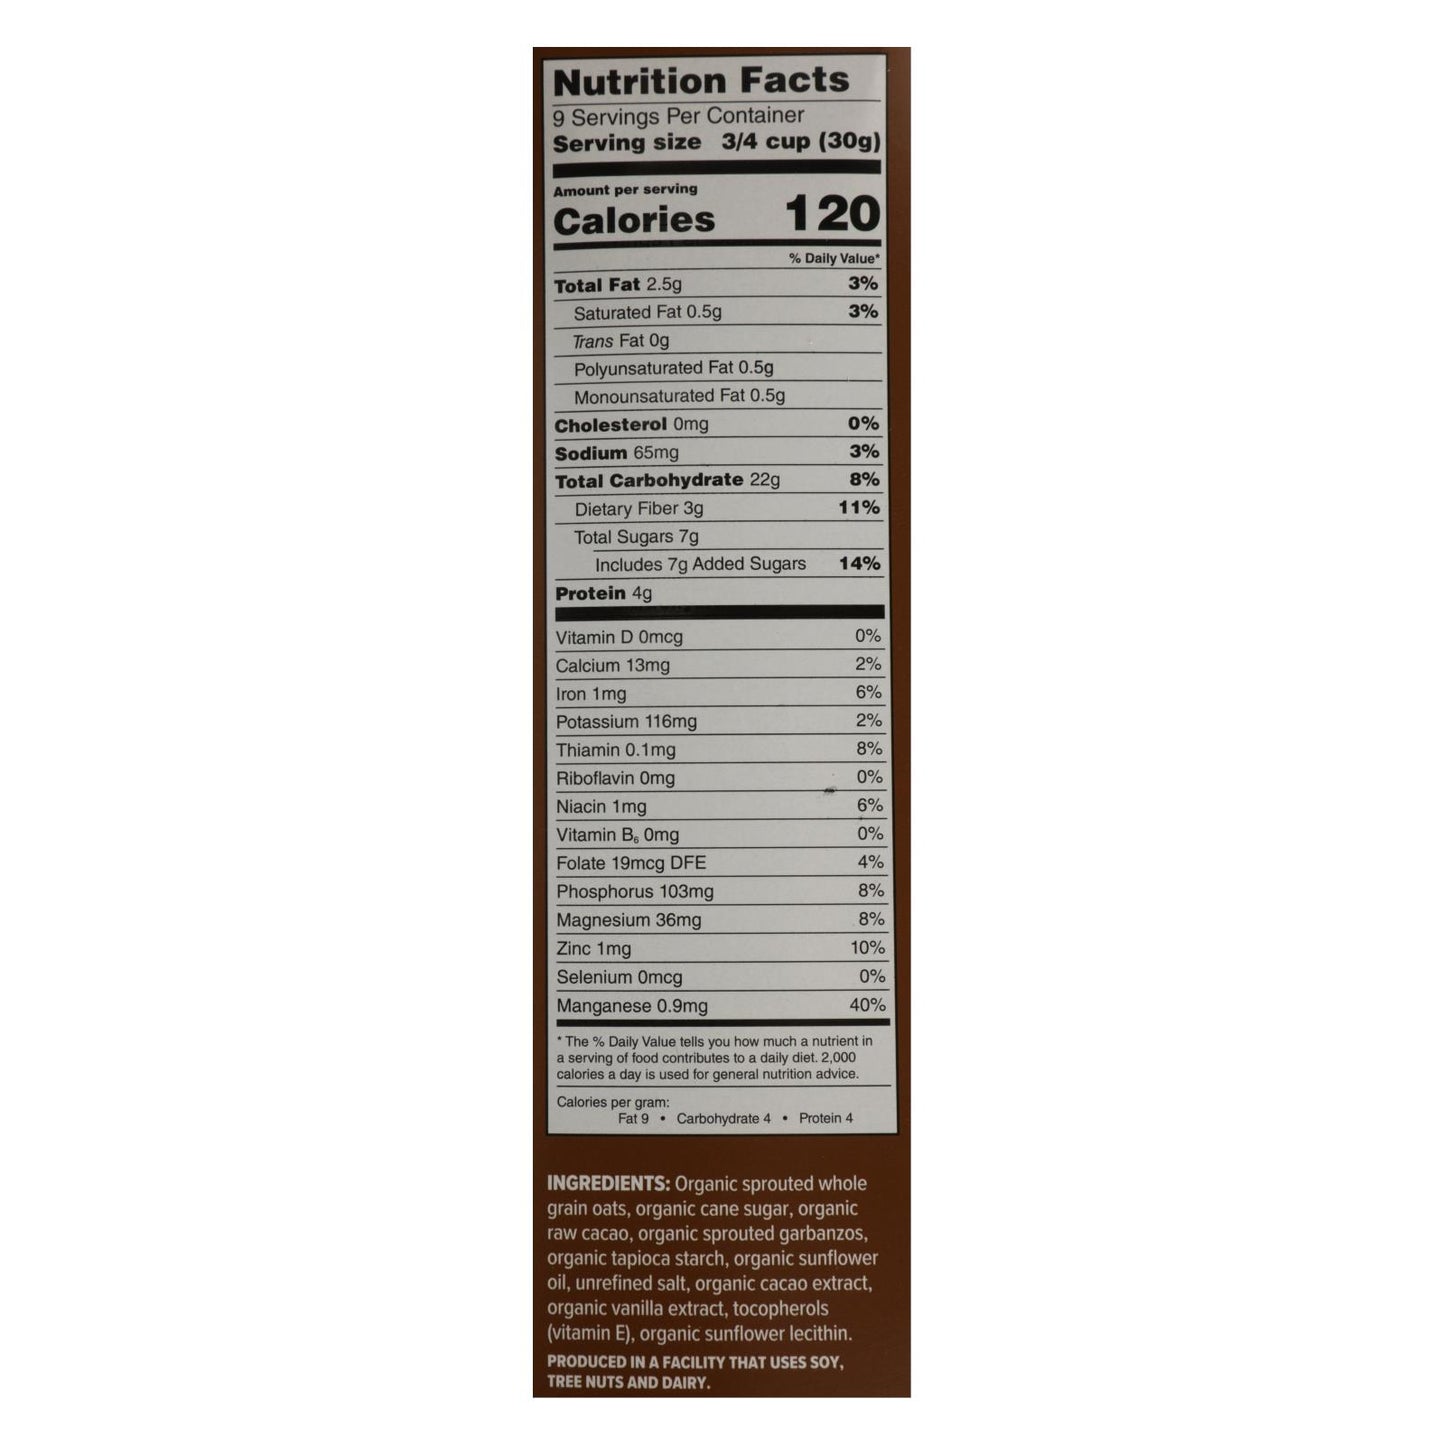 One Degree Organic Foods - Crl Sprtd Cacao O's - Case Of 6 - 10 Oz